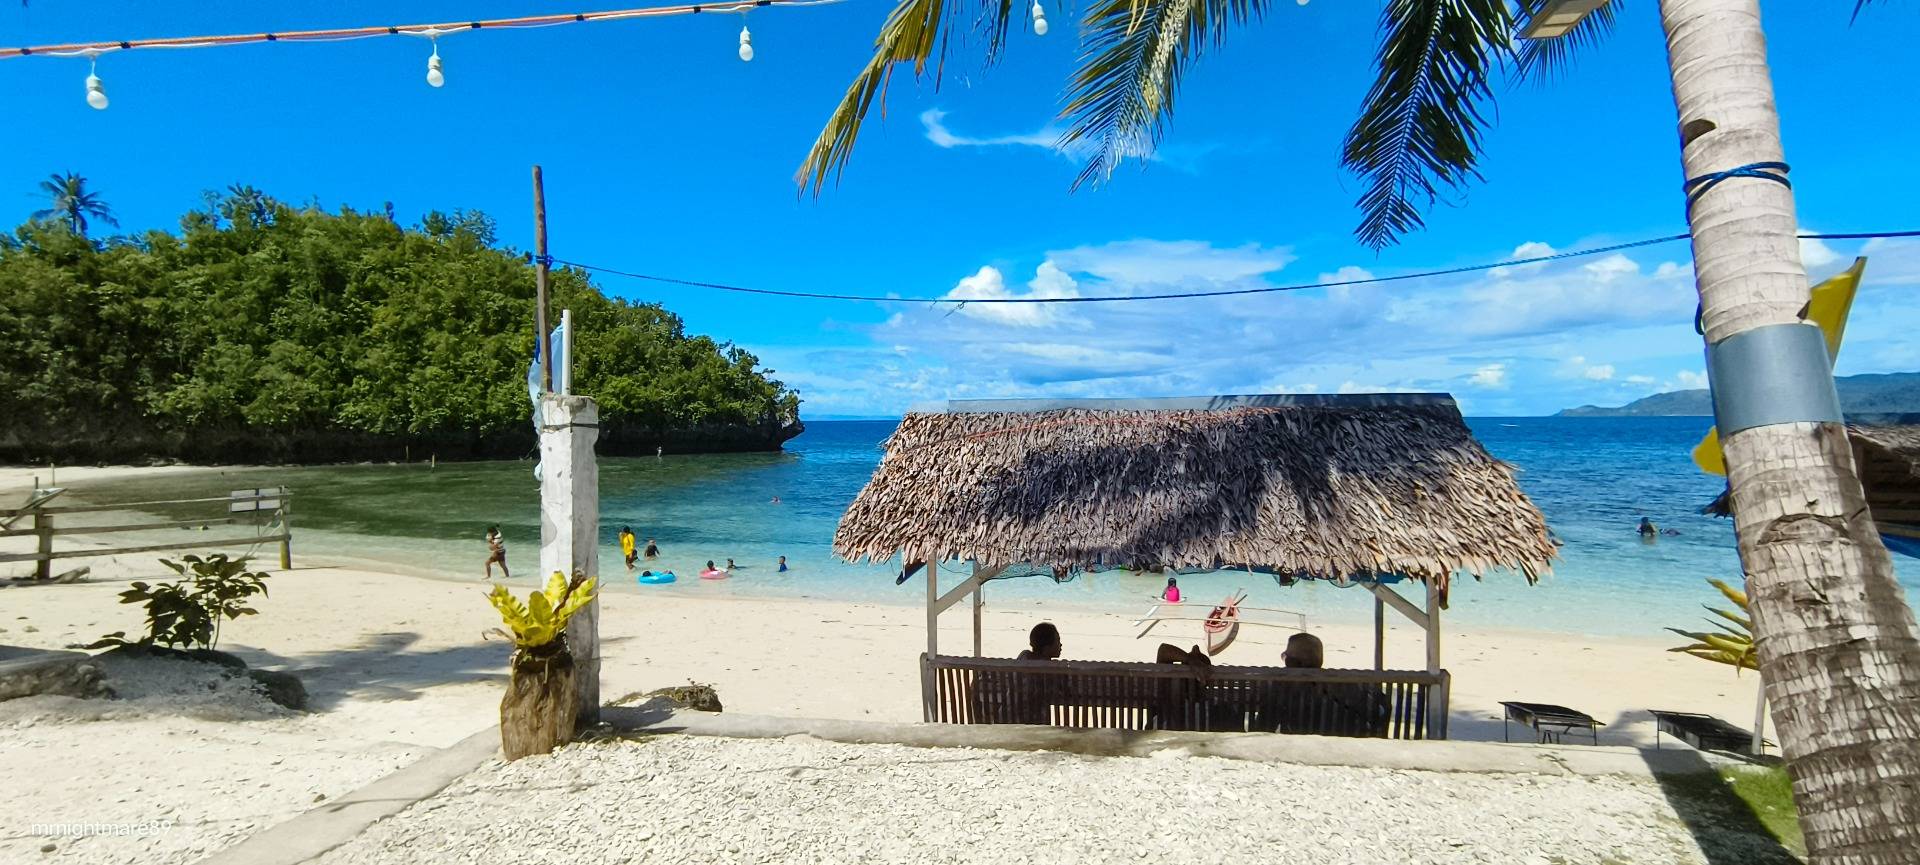 Though you will see a lot of people here. It’s expected because just like the others, they’ve seen this beach with spectacular beauty. No worries about it, the beach has a wide space. Whether you’ll stay in the cottages or a place with isolation.